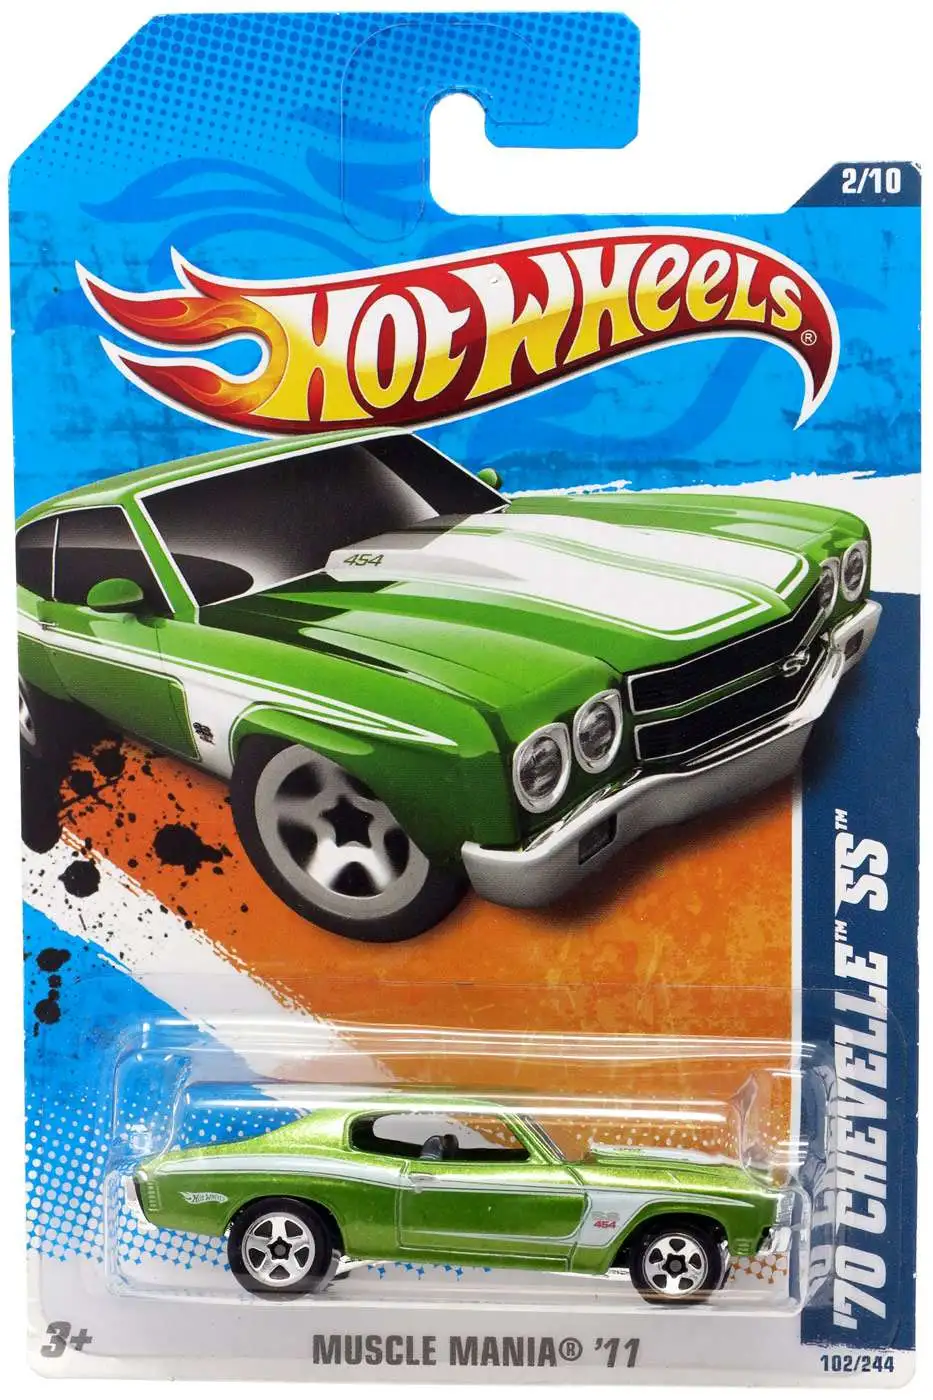 2011 HOT WHEELS MUSCLE MANIA 70 CHEVELLE SS 